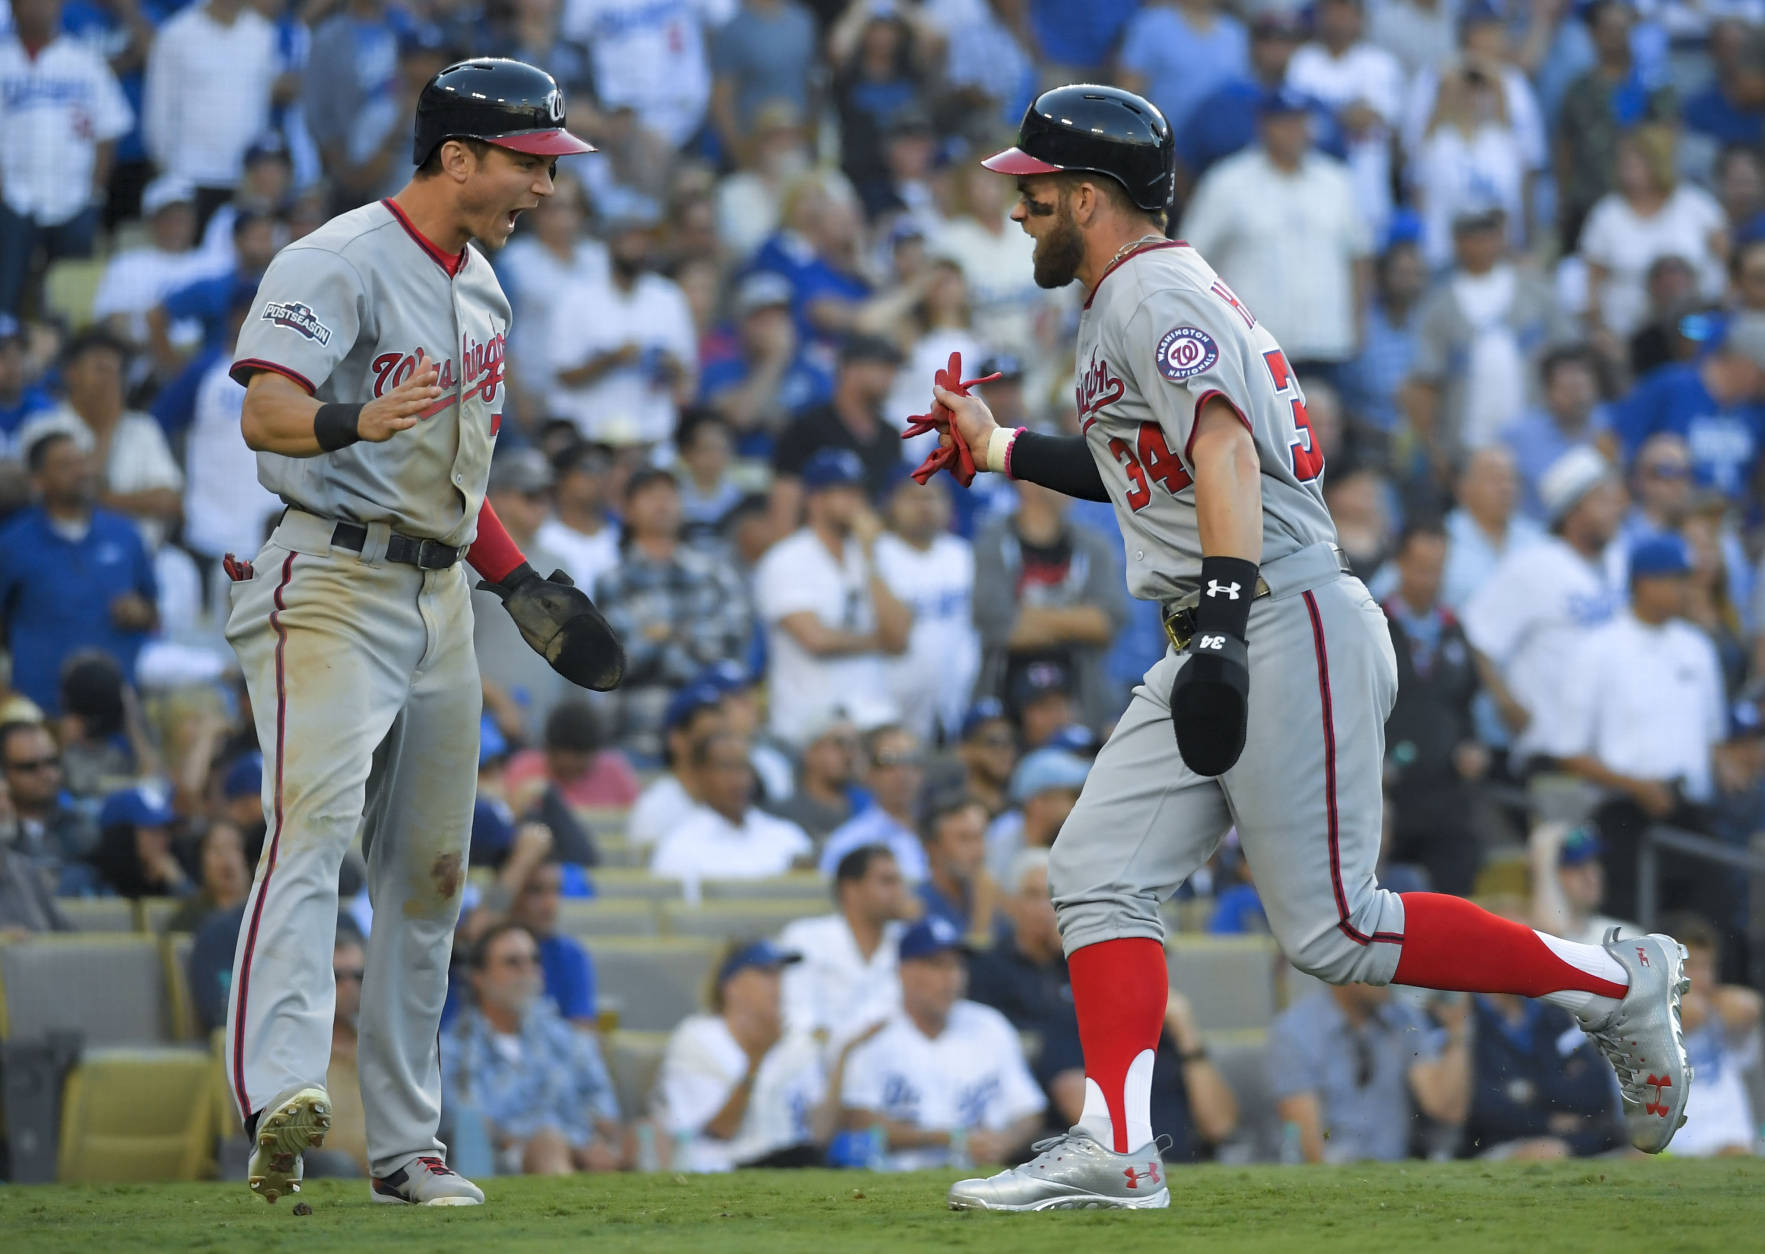 Washington Nationals' Bryce Harper, right, celebrates with Trea Turner after scoring on the two RBI single by Daniel Murphy during the seventh inning in Game 4 of baseball's National League Division Series against the Los Angeles Dodgers in Los Angeles, Tuesday, Oct. 11, 2016. (AP Photo/Mark J. Terrill)